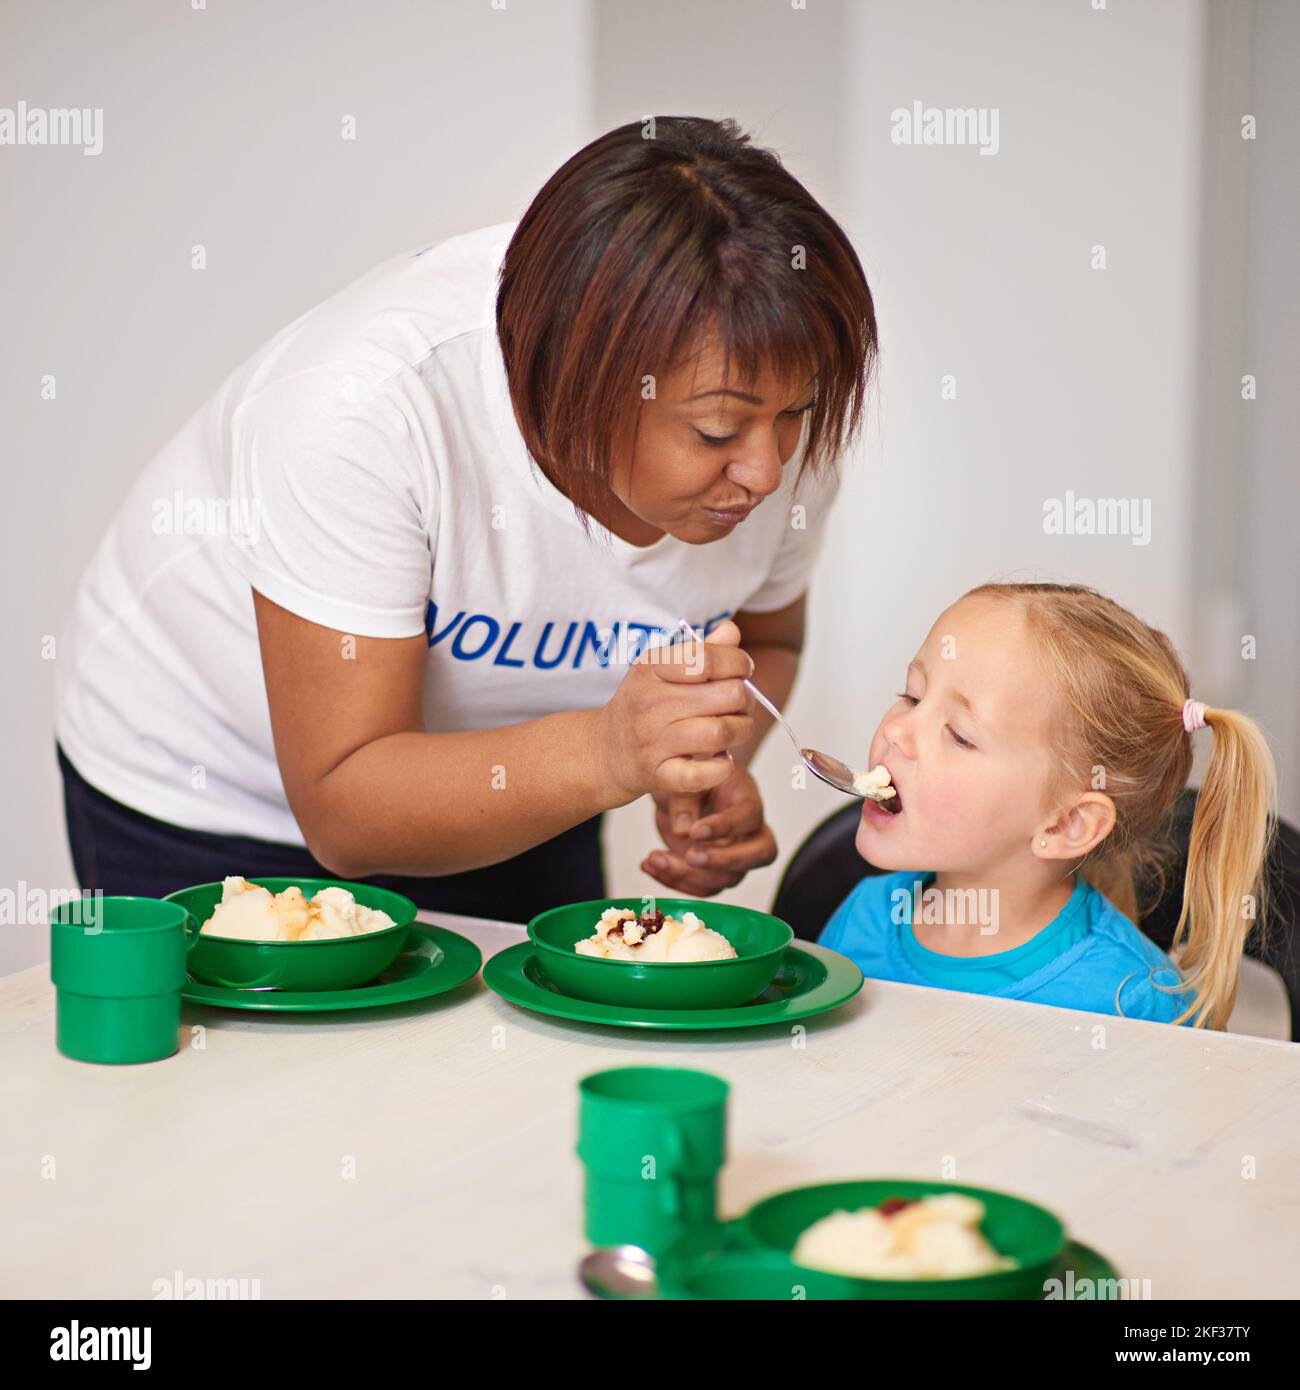 Providing nutritious meals one spoonful at a time. a volunteer feeding a little girl at a youth center. Stock Photo